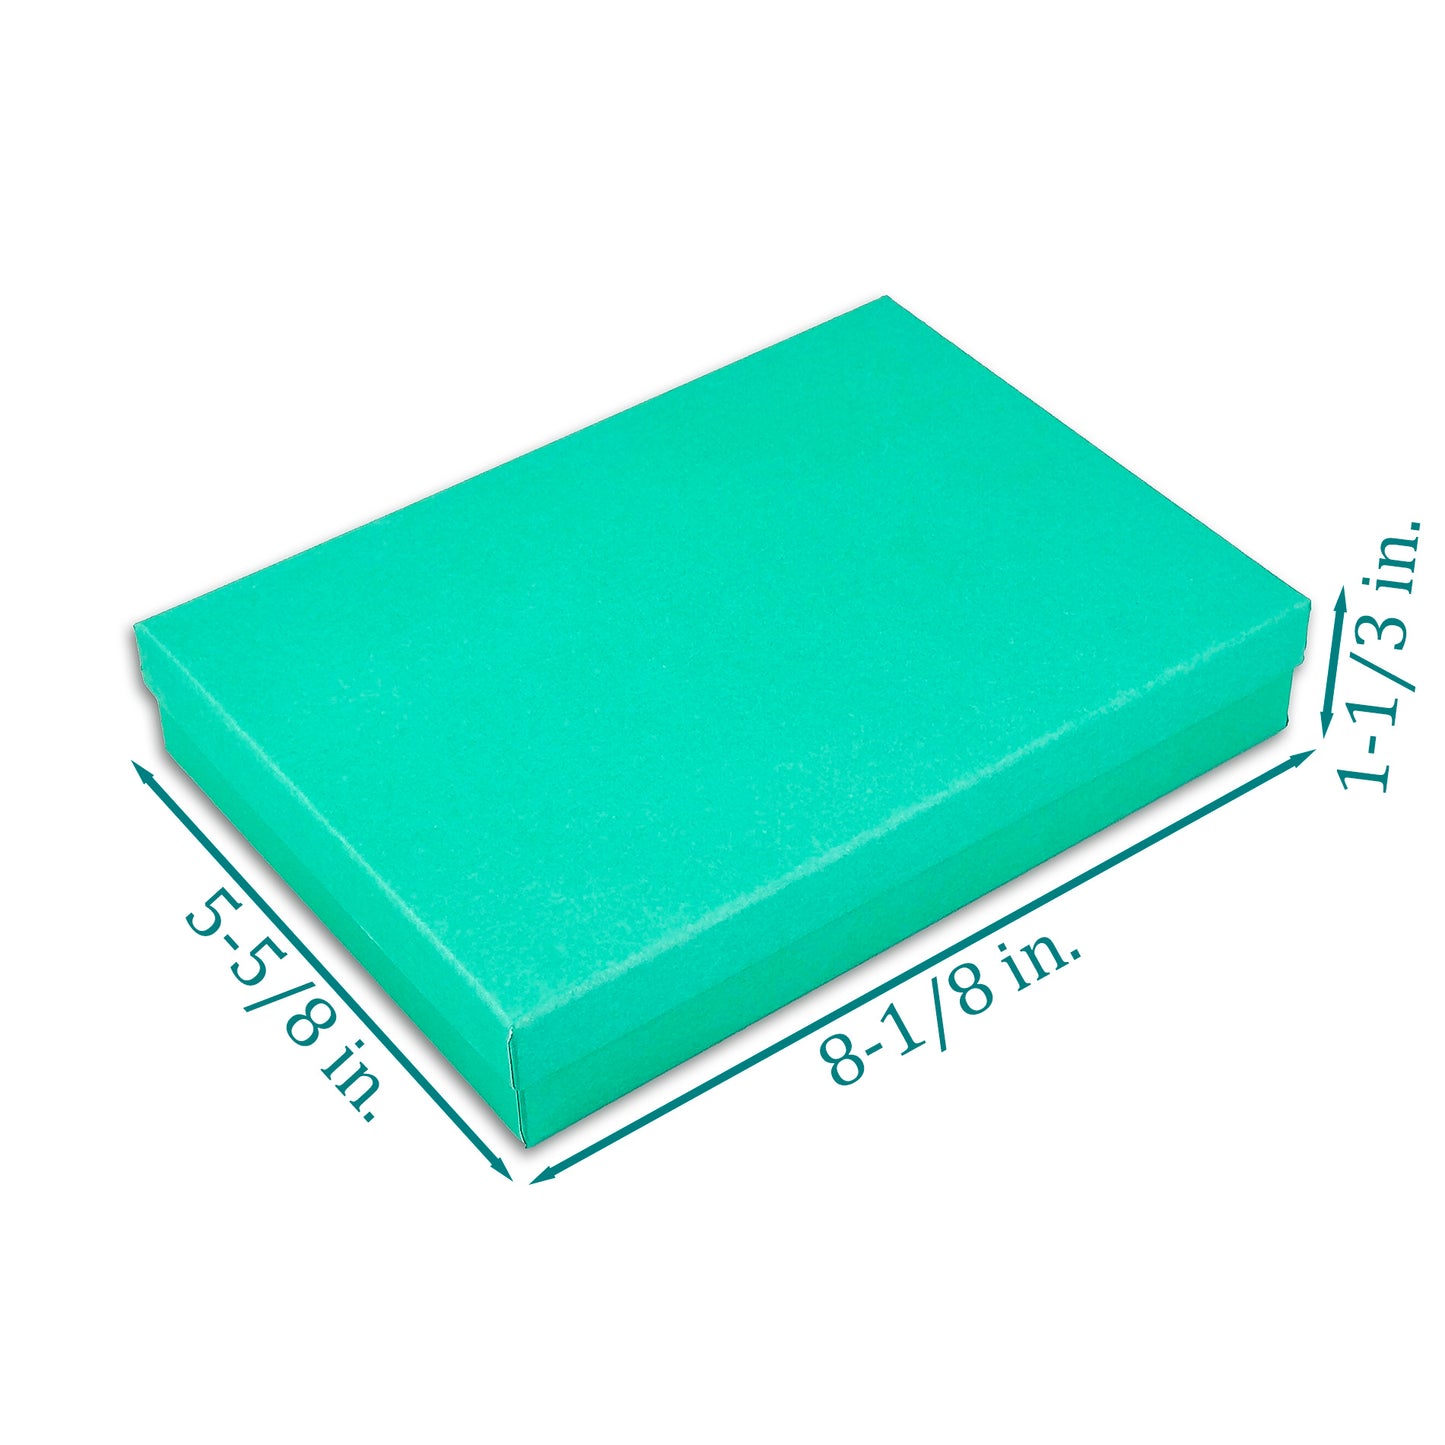 8 x 5 x 1 1/4"H Teal Cotton Filled Paper Box